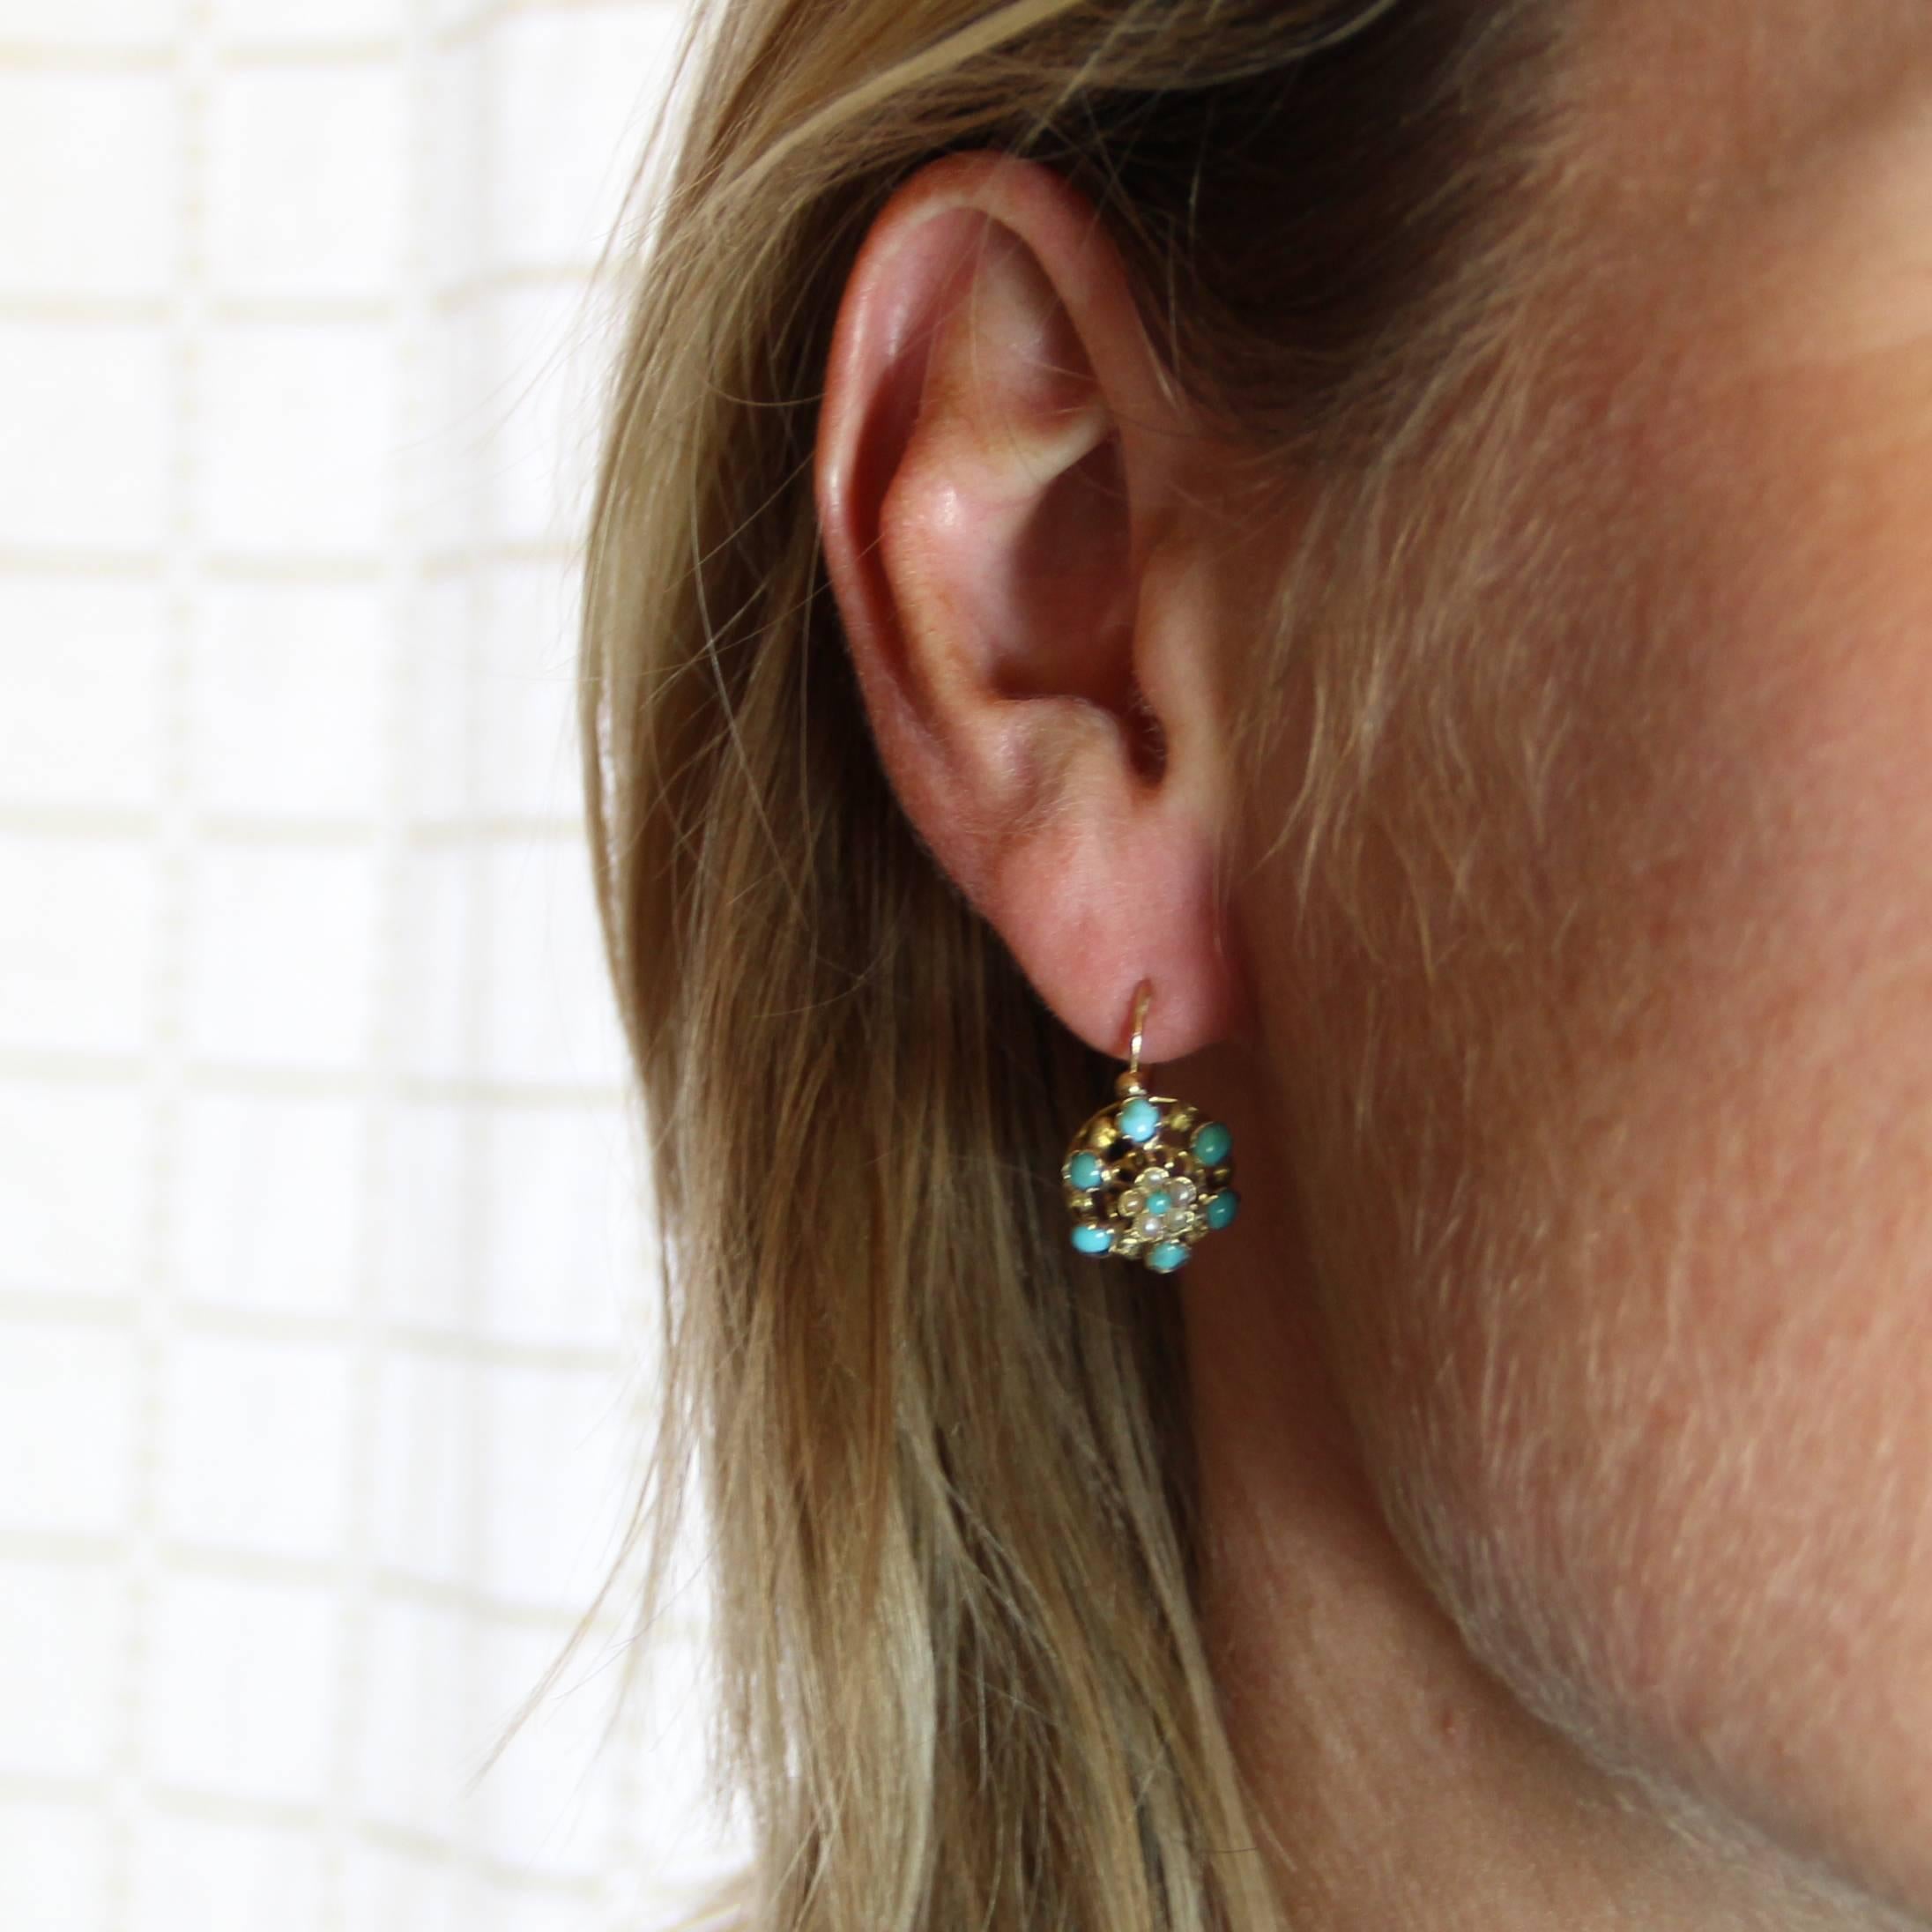 For pierced ears.
Earrings in 18 carats yellow gold, eagle's head hallmark.
Beautiful drop earrings, each one is set with 5 half pearls and centered with a turquoise cabochon. The openwork decoration is set with 6 turquoise cabochons. The clasp